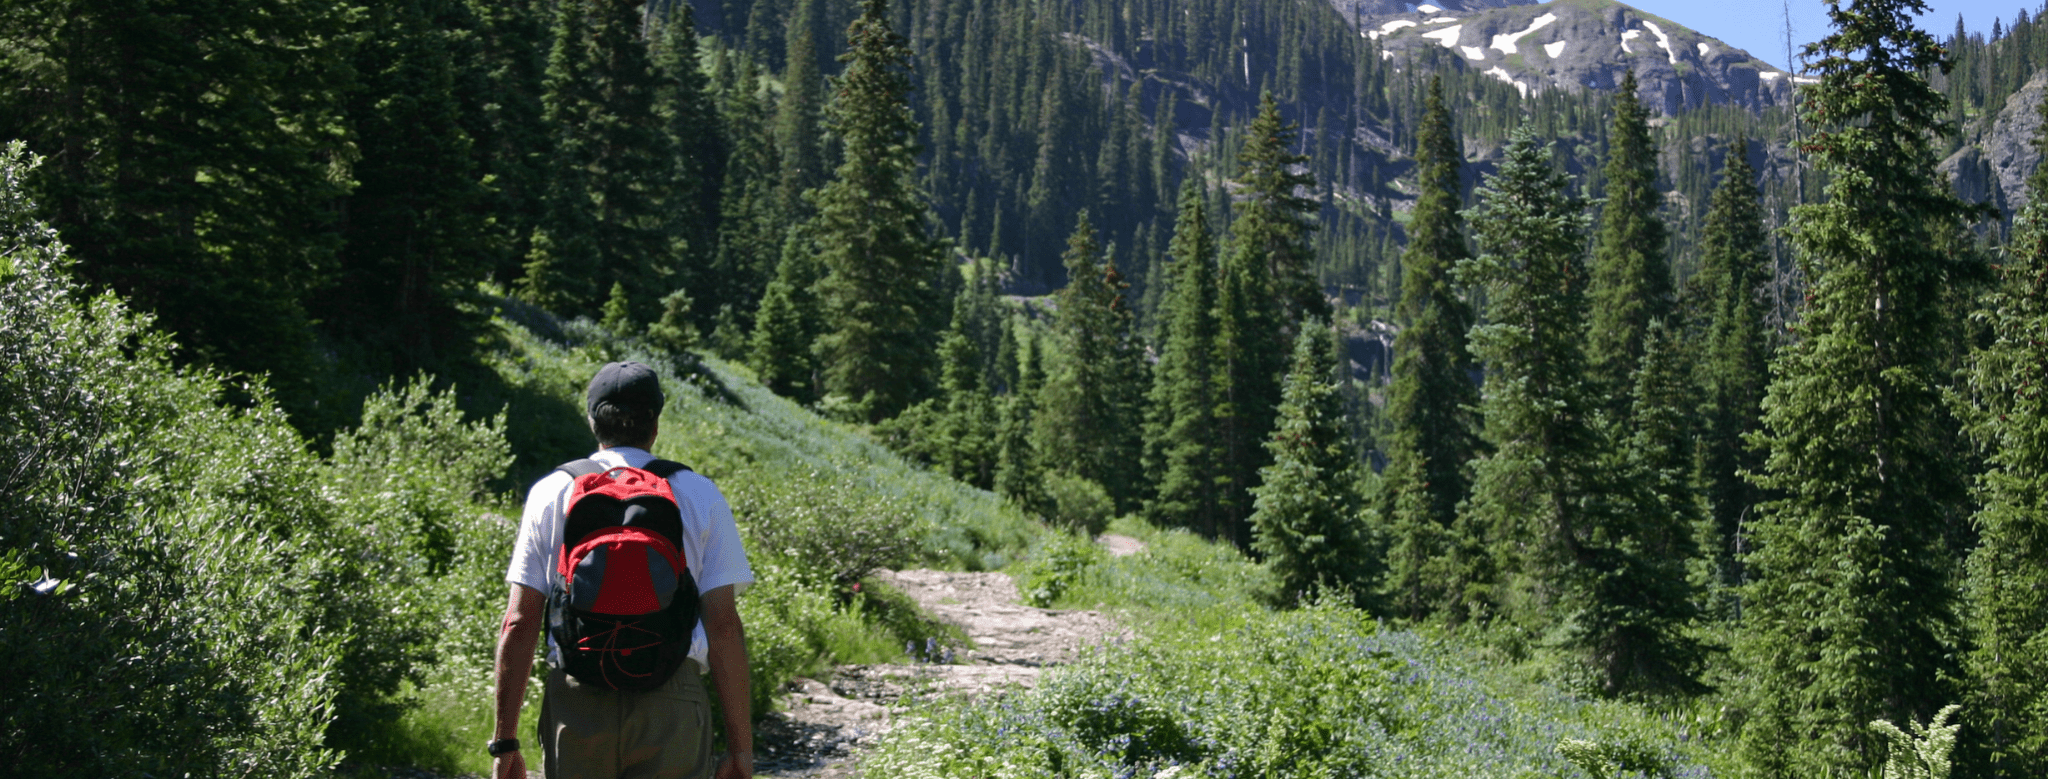 adult male wearing a red backpack walking on a trail into the woods